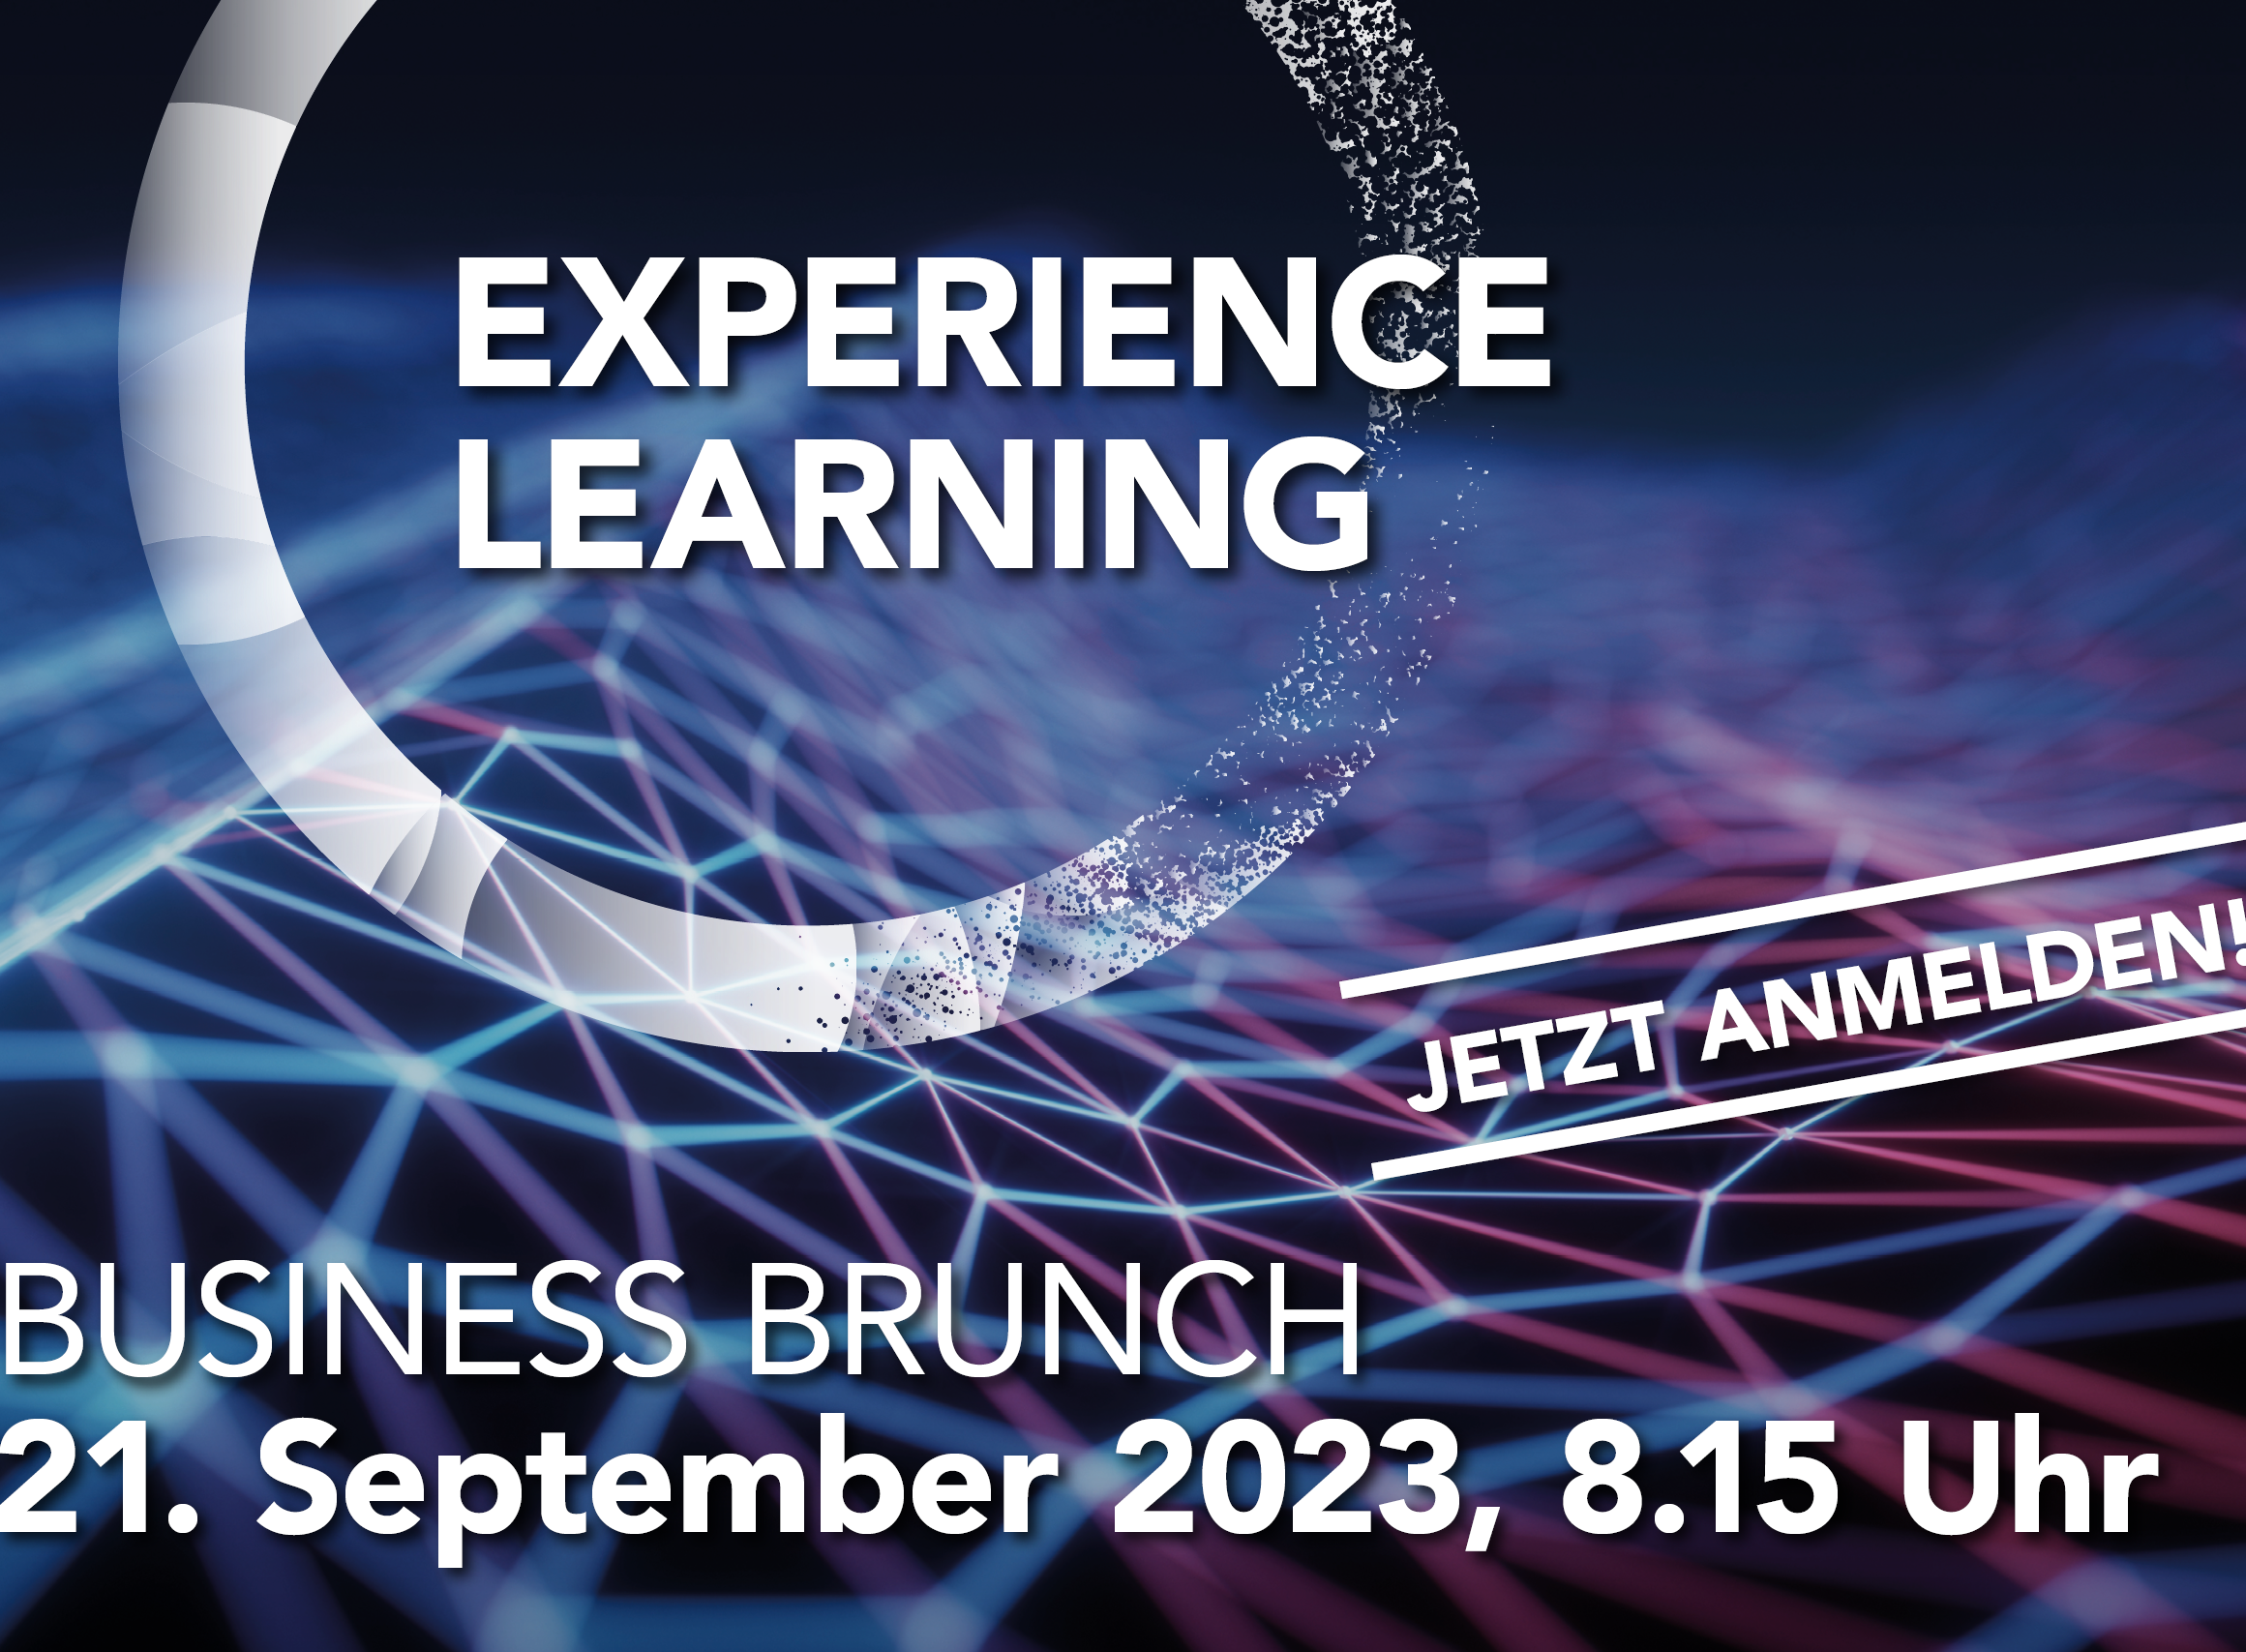 Business Brunch 2023 bei UNI for LIFE: Experience Learning 